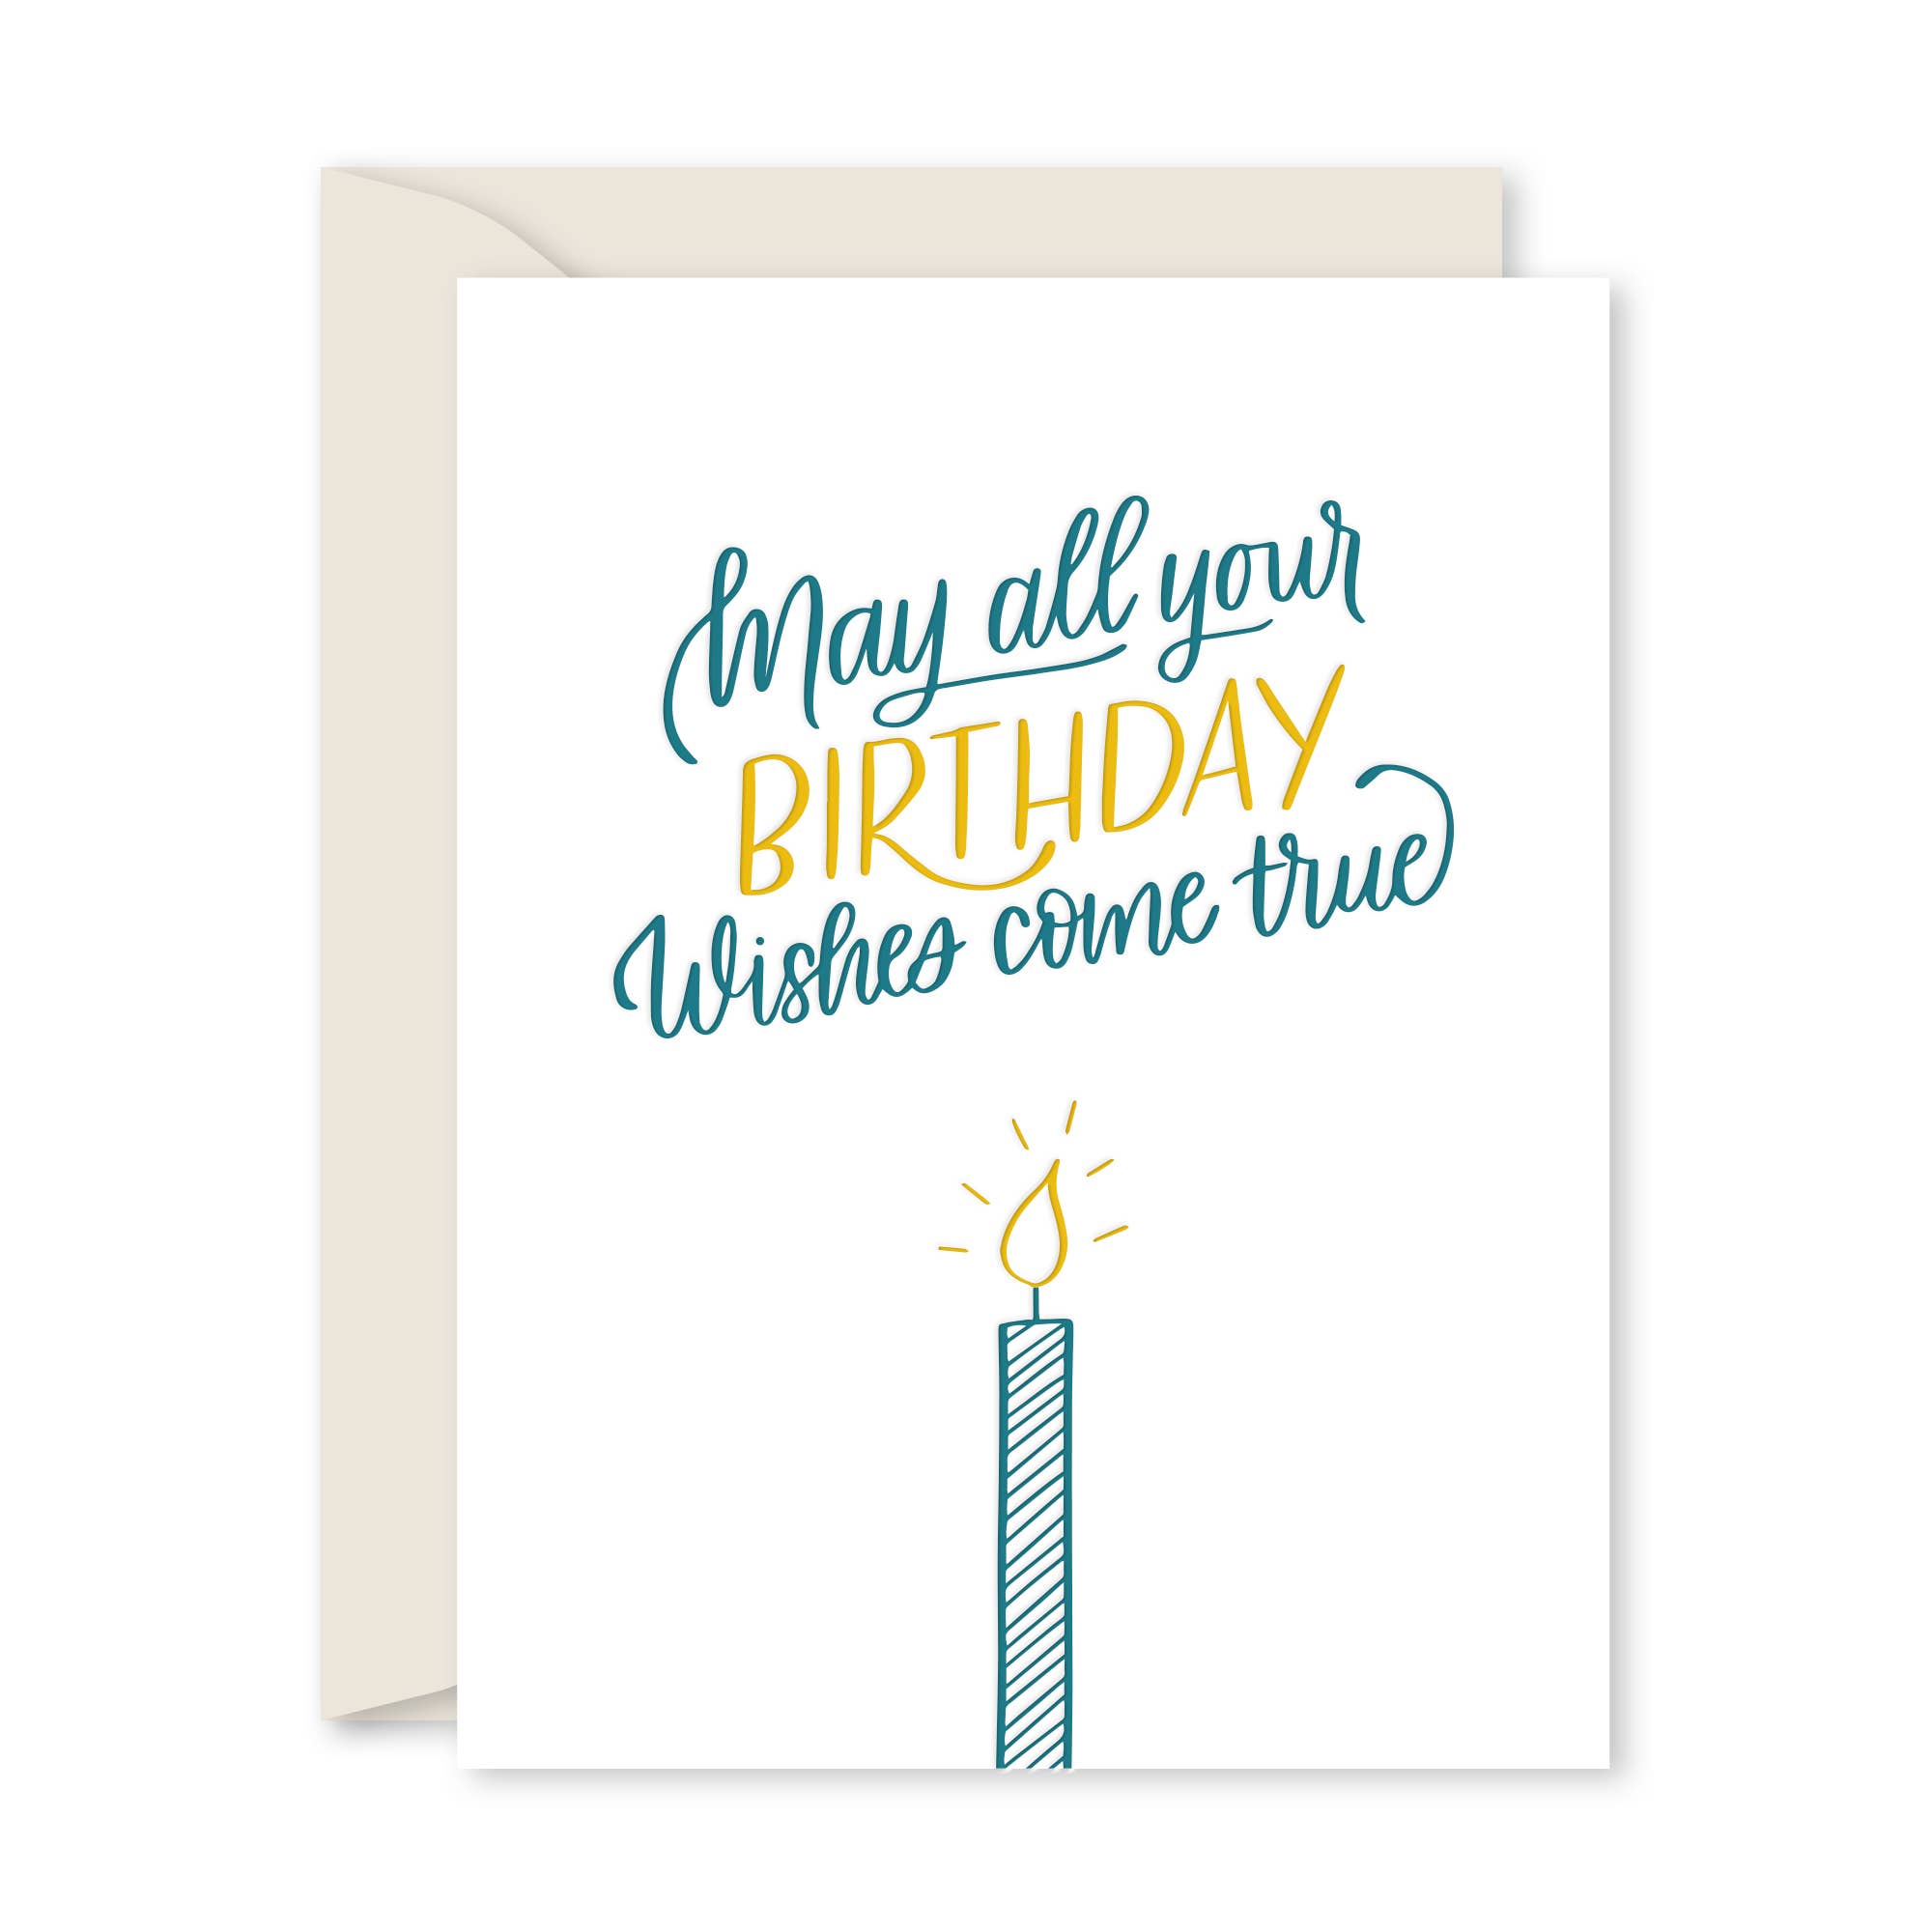 CANDLE WISHES GREETING CARD